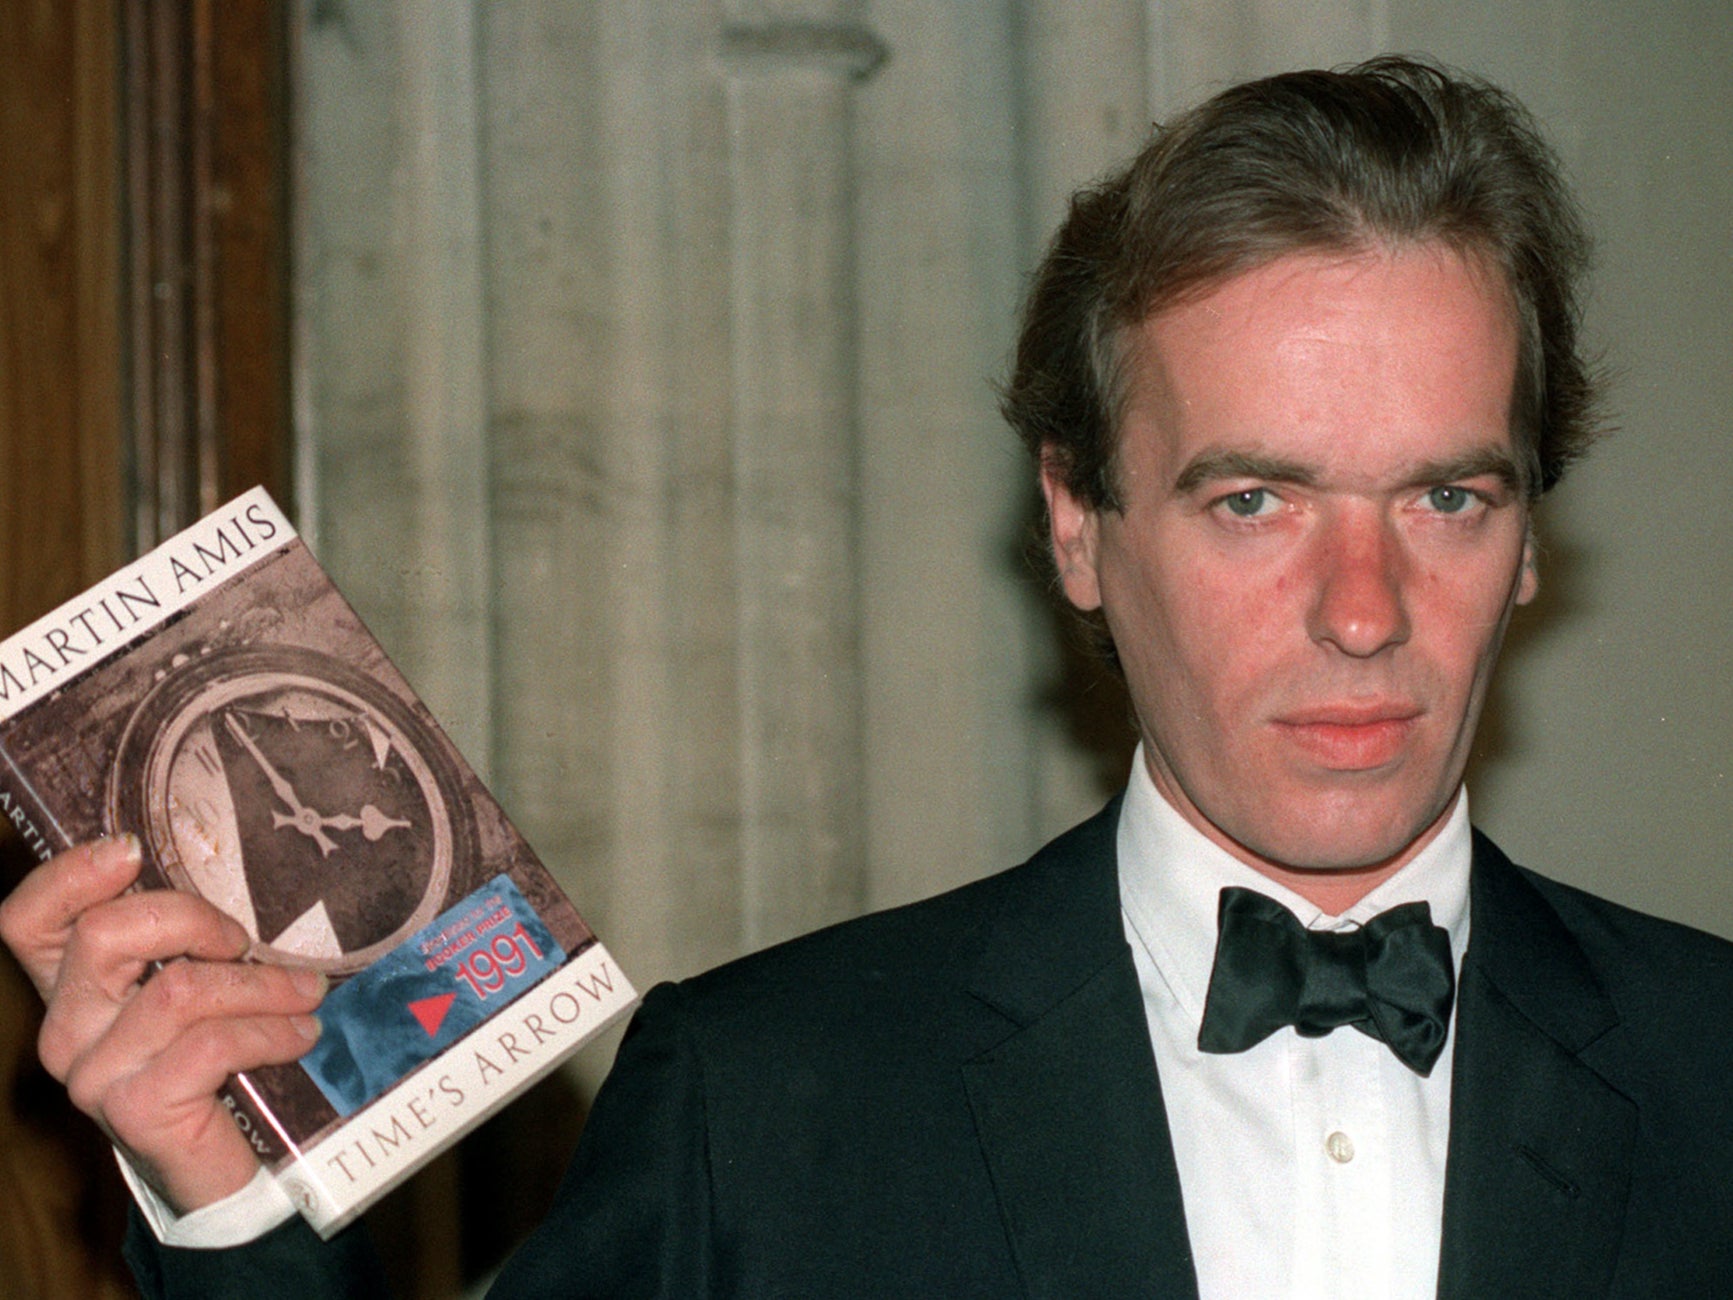 Martin Amis, who died last month, is to be awarded a knighthood in the King’s honours list